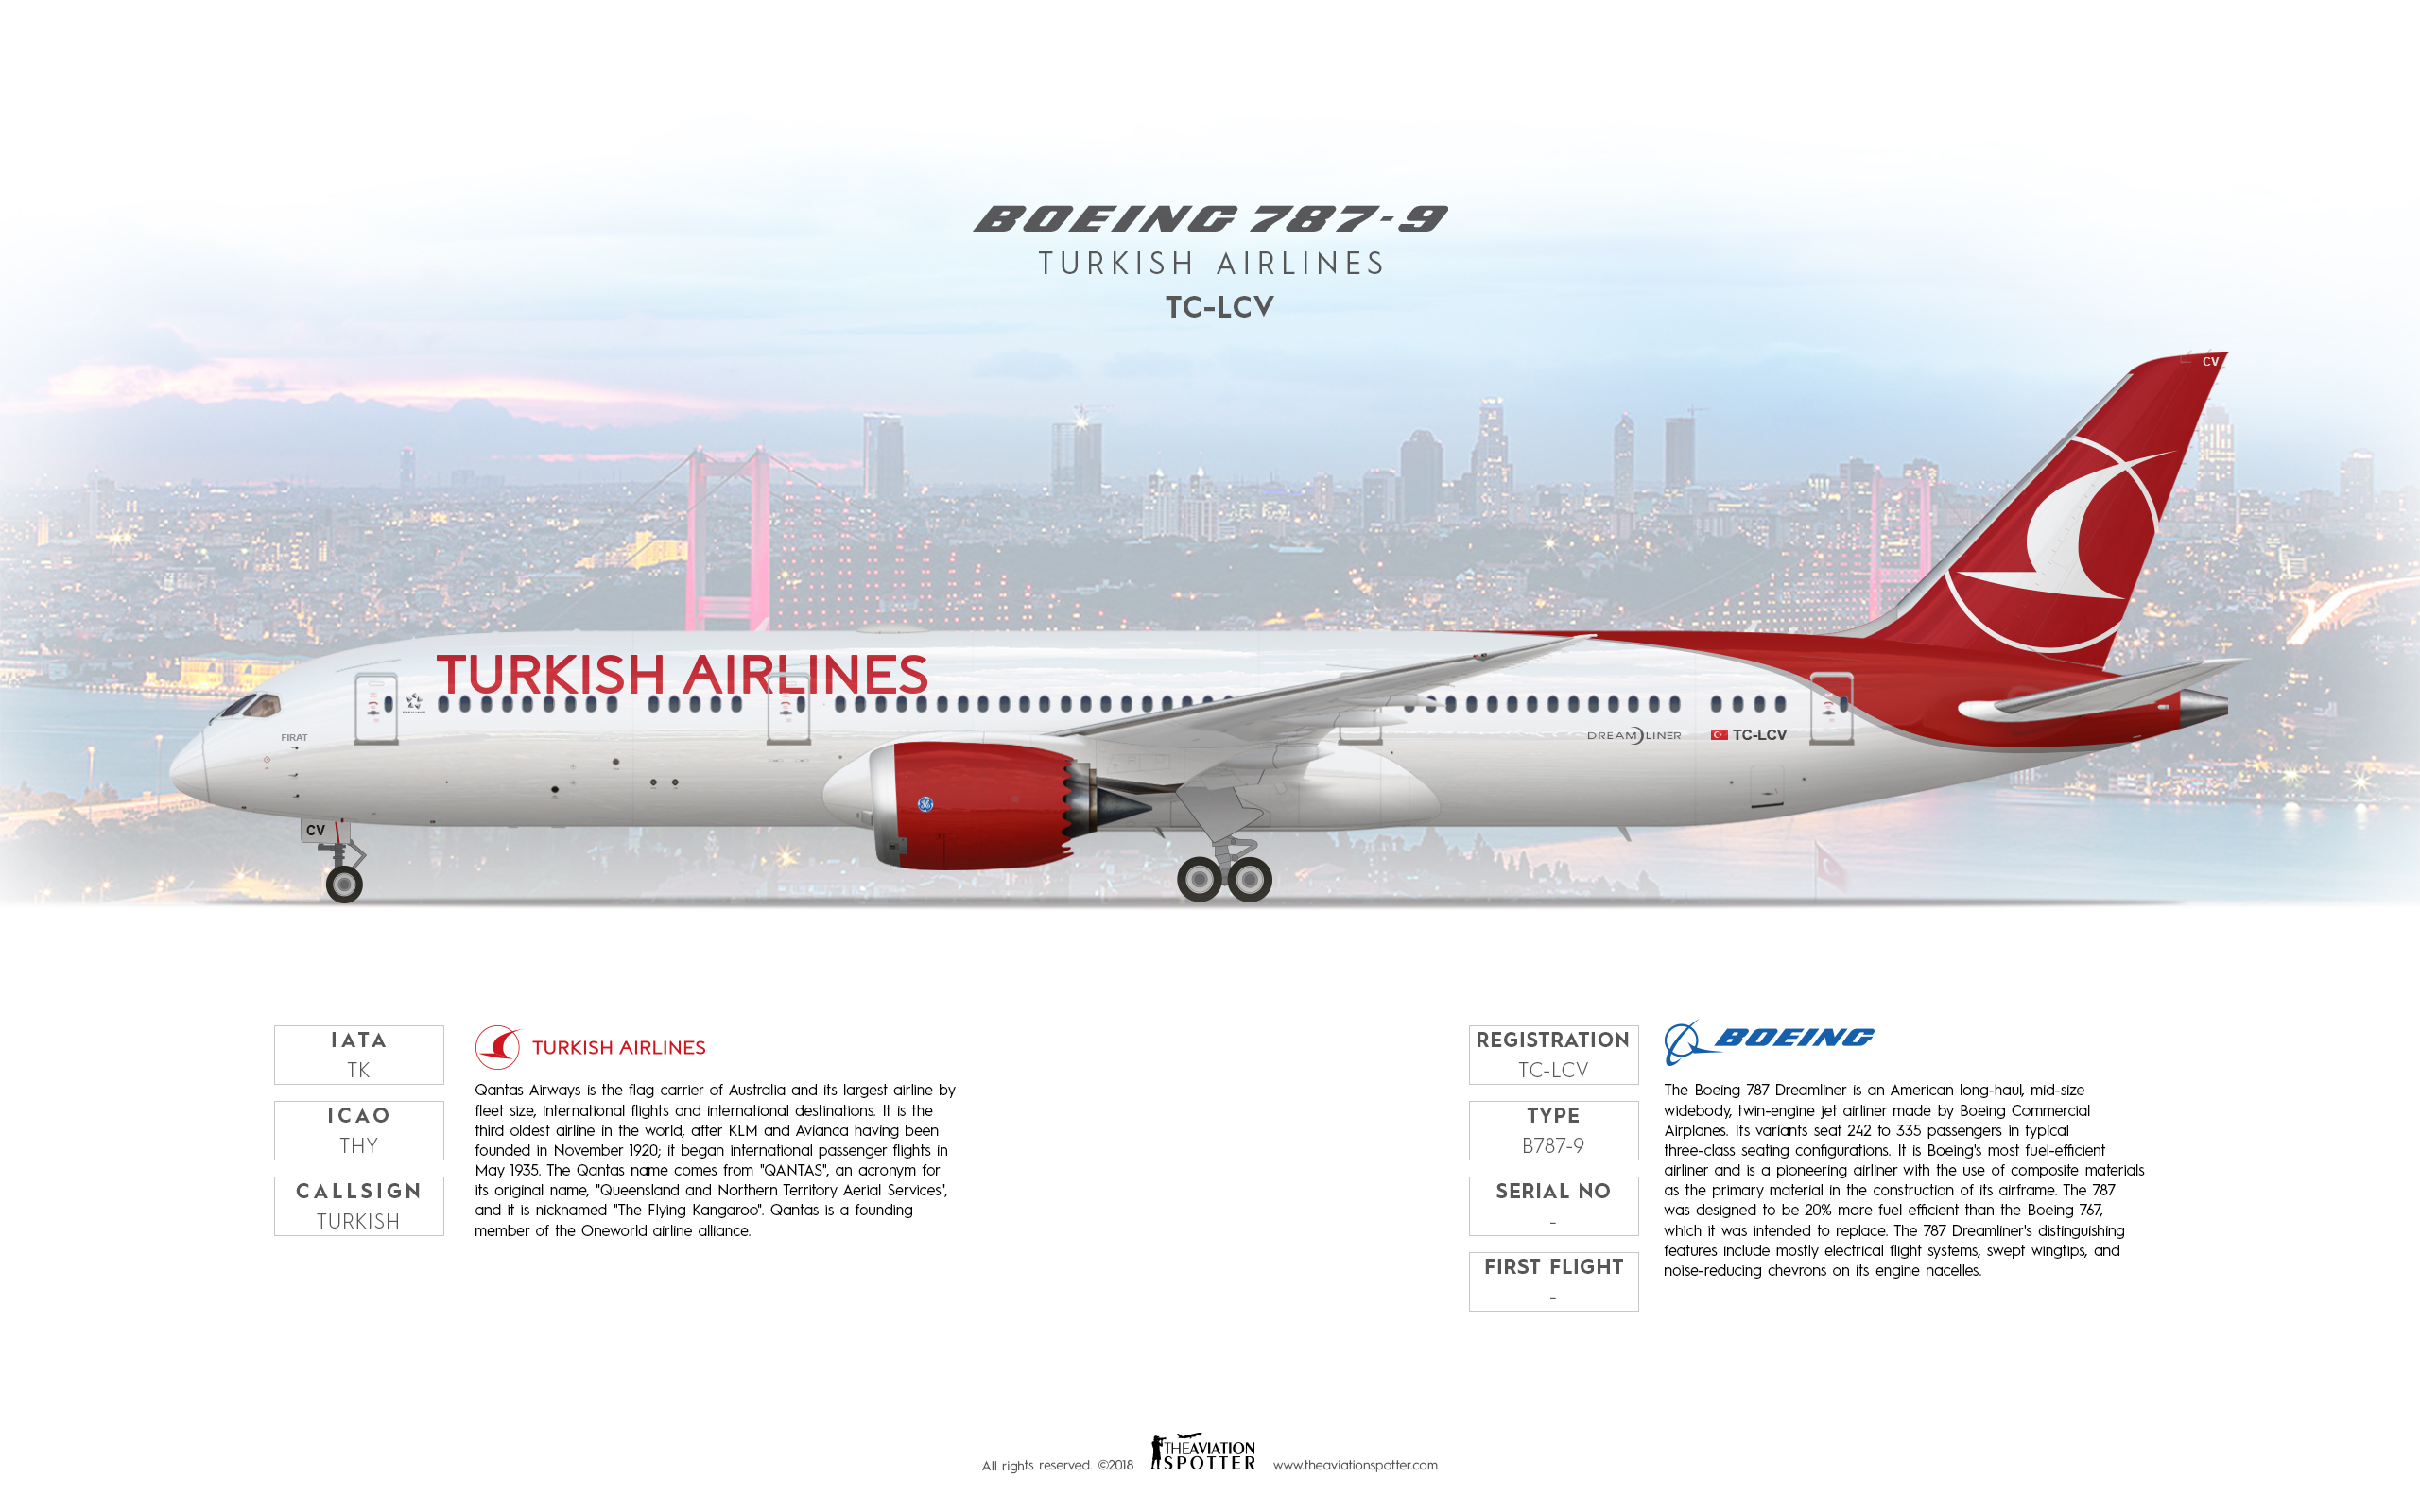 Concept'' Turkish Airlines Boeing 787 9 Dreamliner - Theaviationspotter's  Painting Hangar - Gallery - Airline Empires